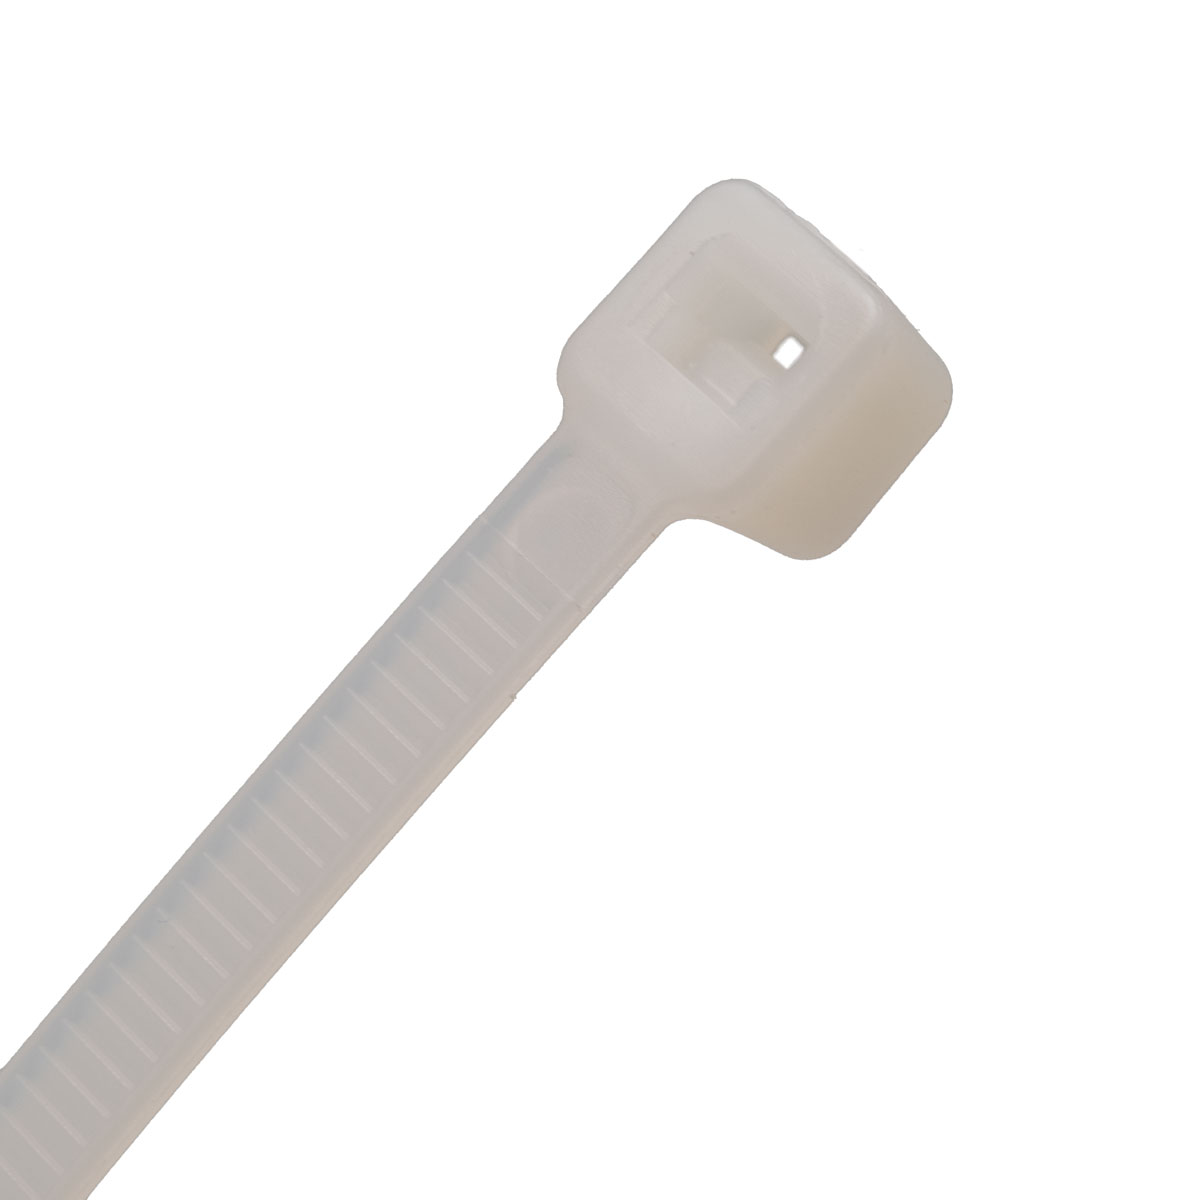 3.6x140mm Natural, Nylon 66 cable tie